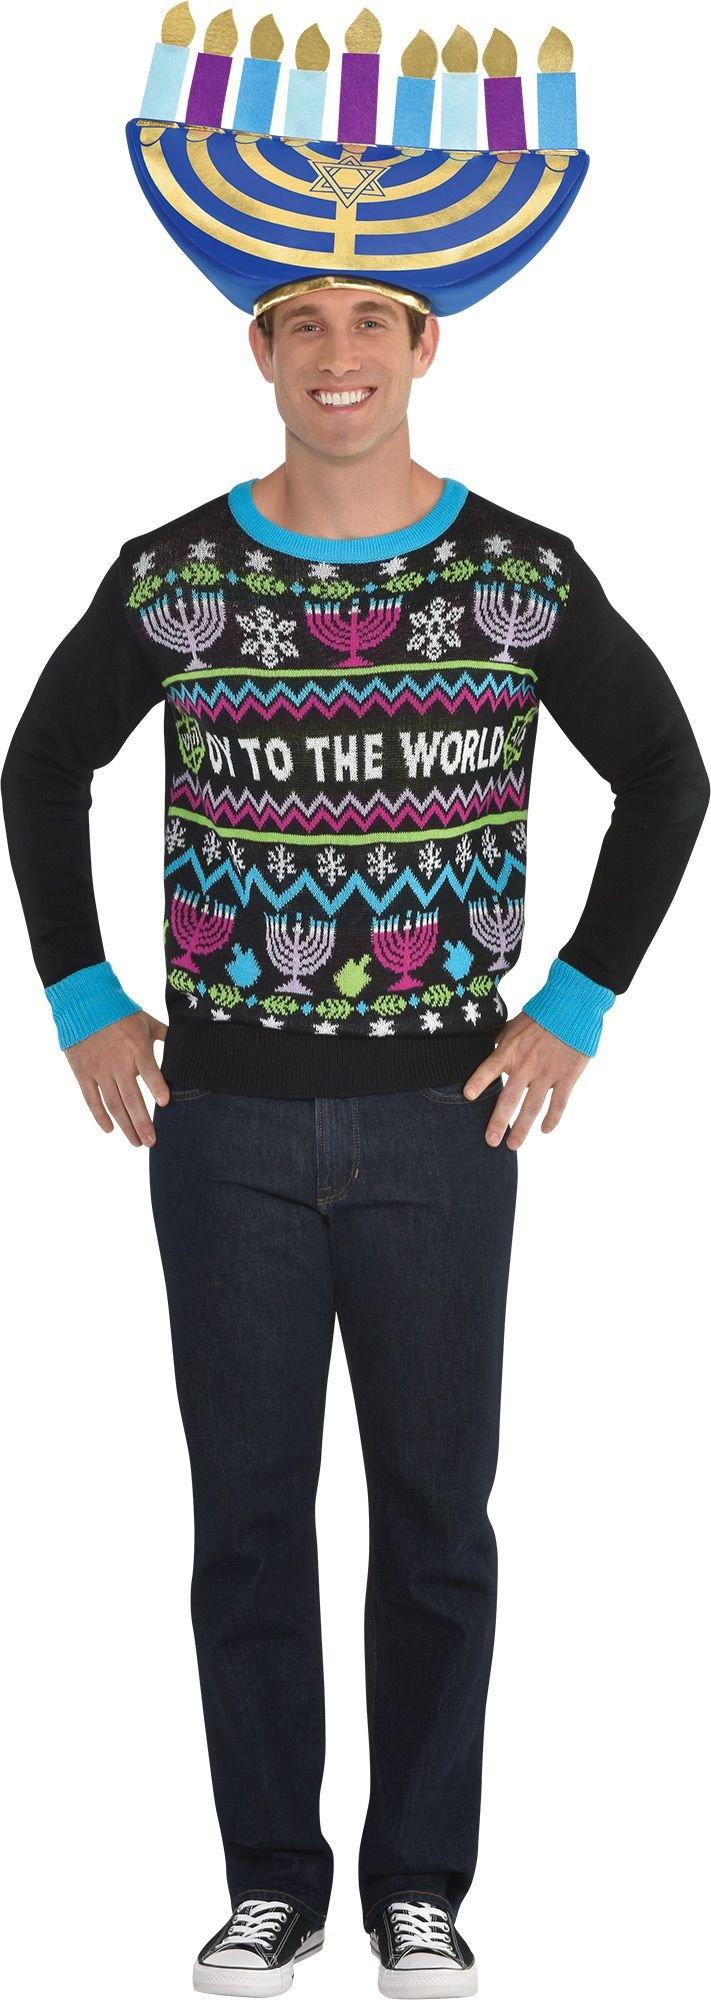 Oy to the World Ugly Hanukkah Sweater